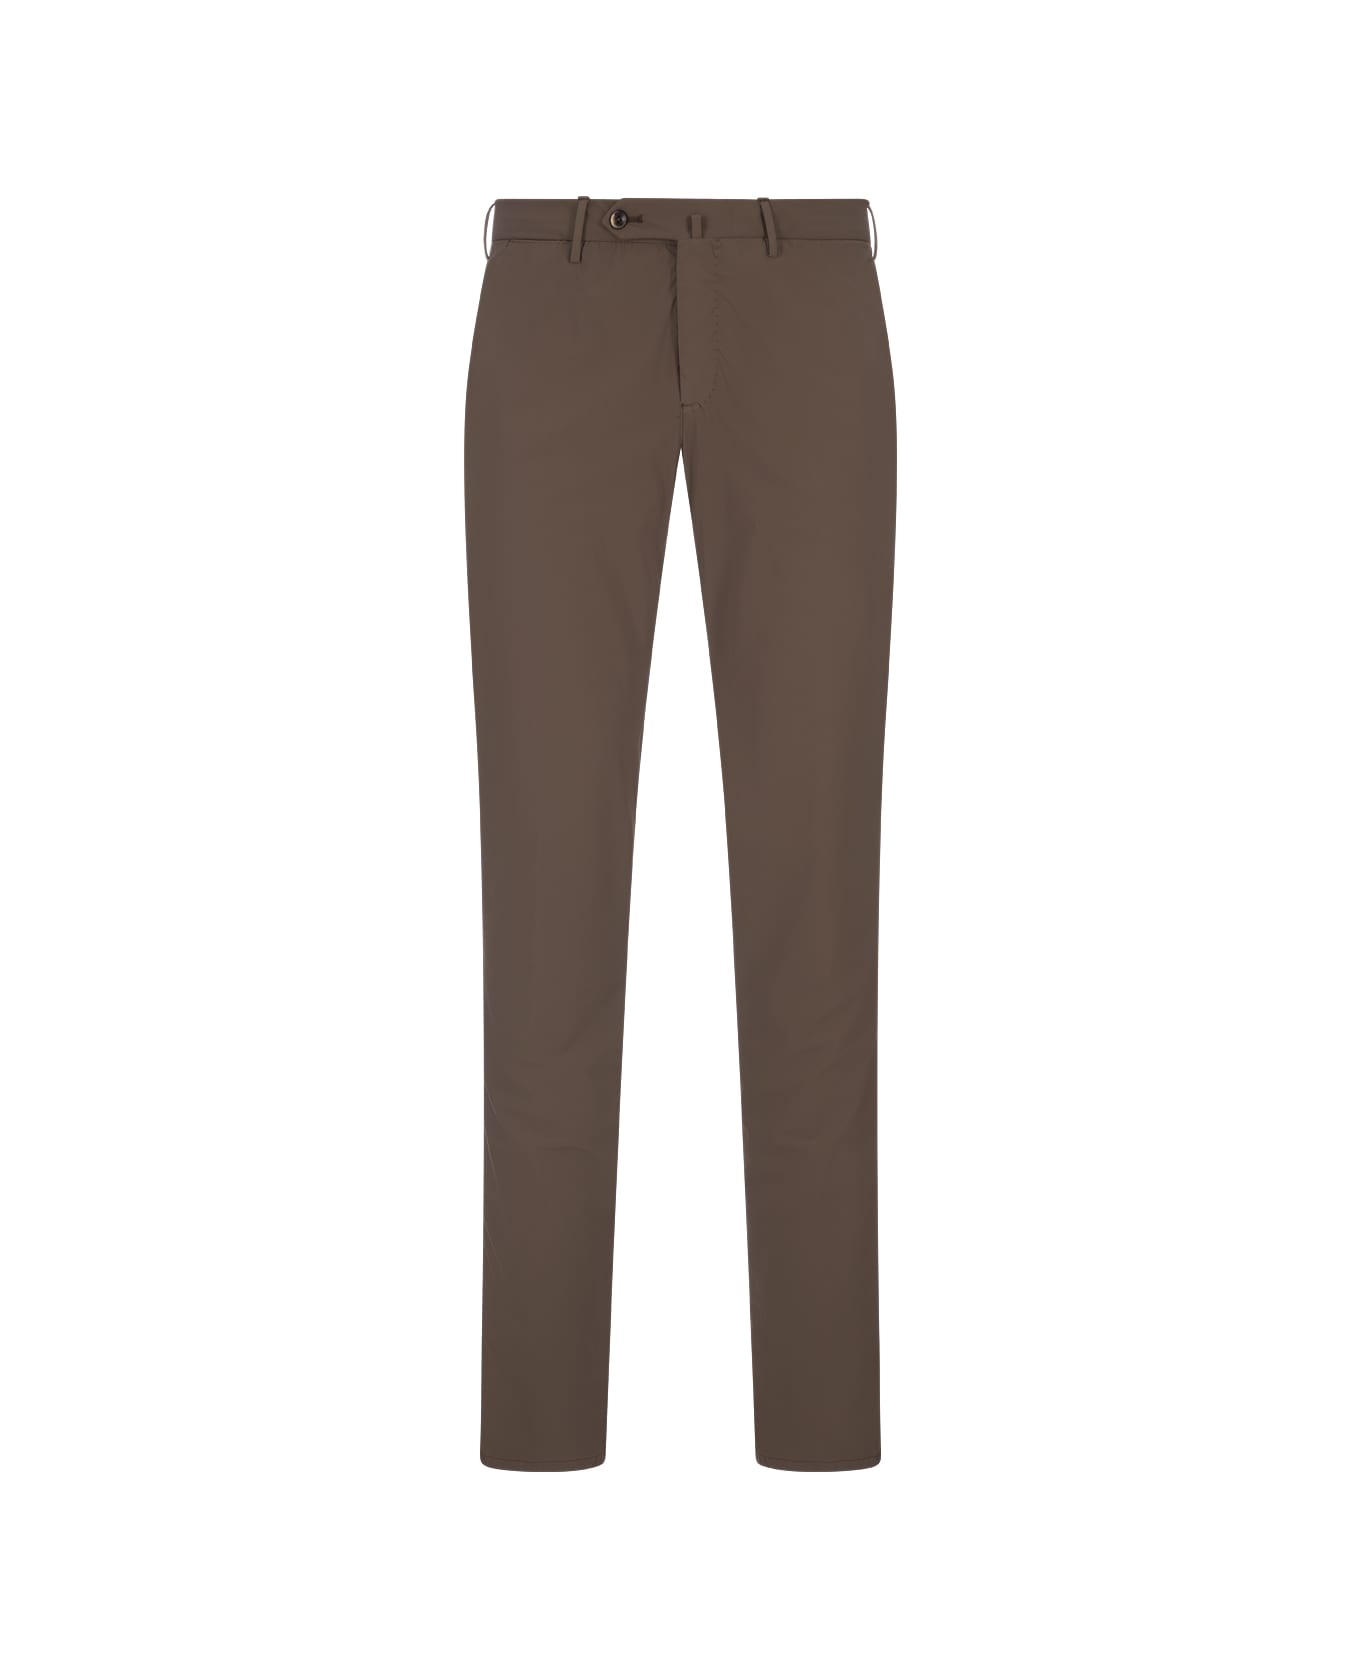 PT Torino Brown Kinetic Fabric Classic Trousers - Brown ボトムス